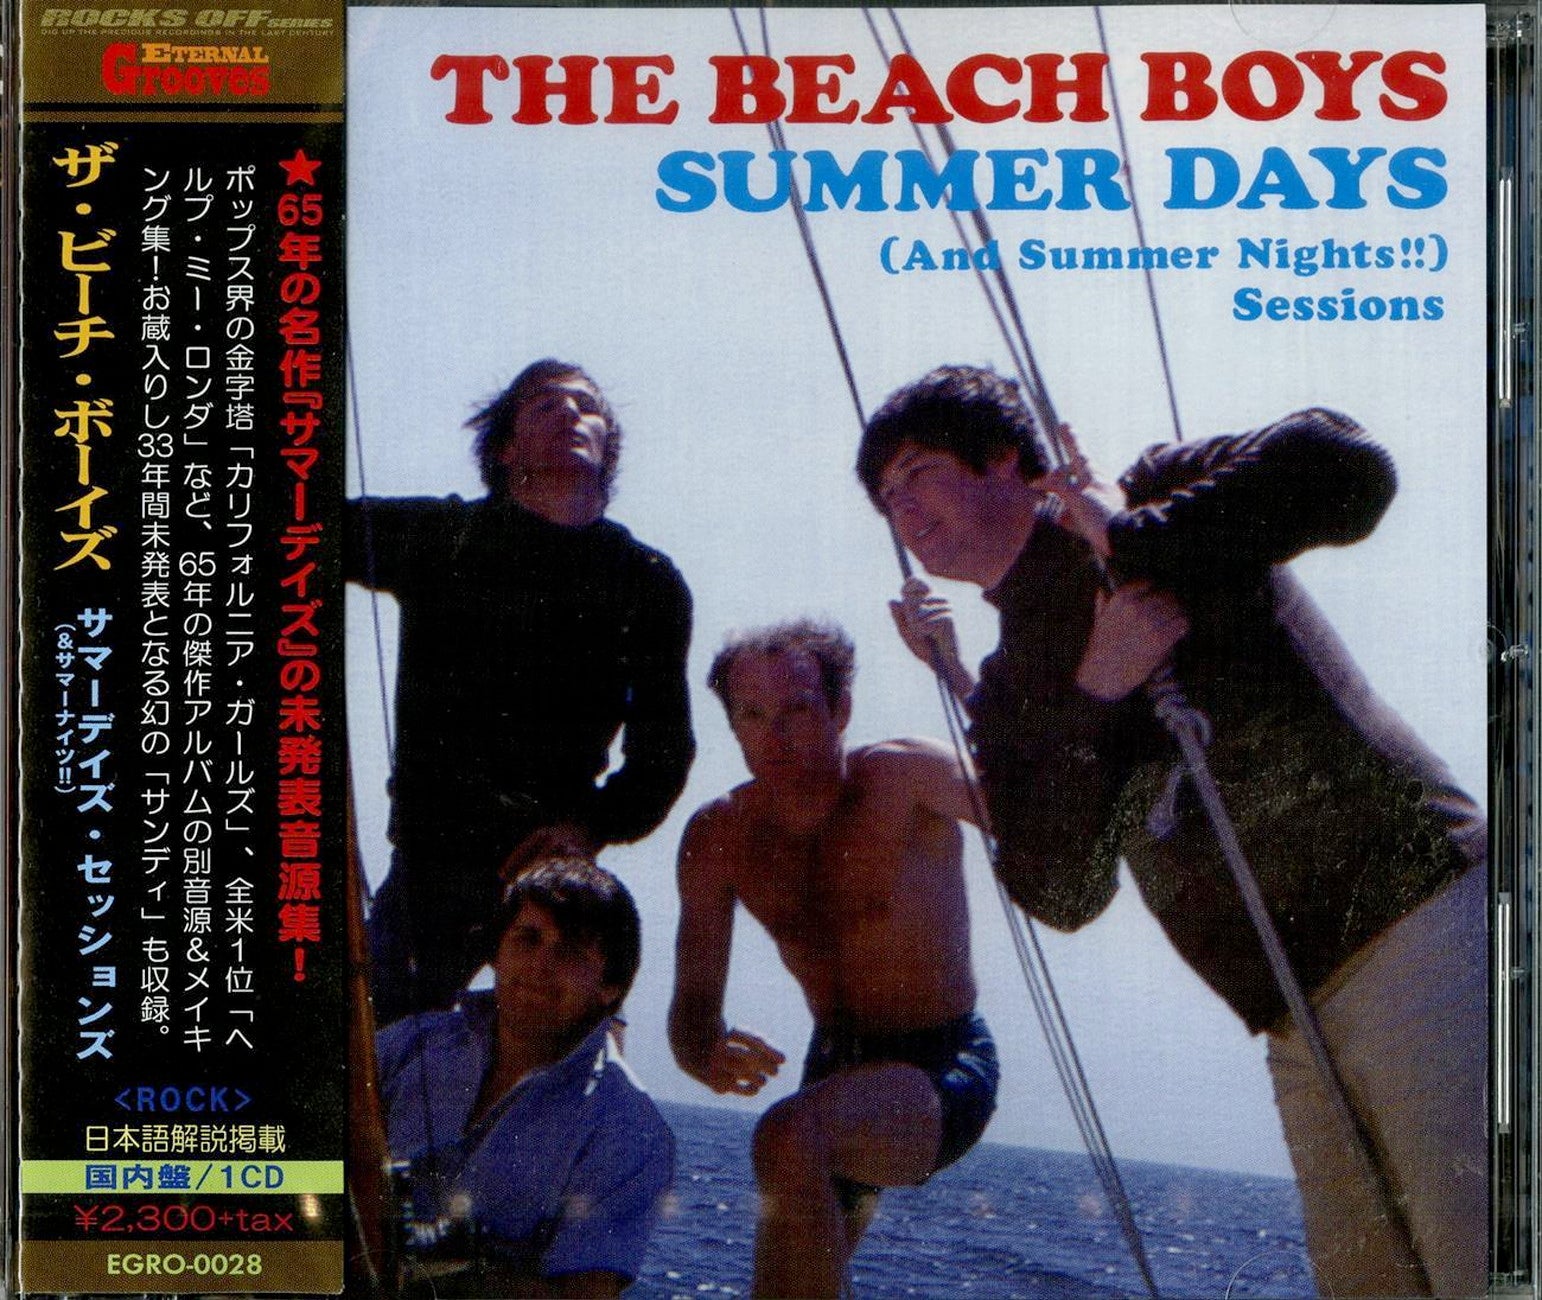 The Beach Boys - Summer Days (And Summer Nights!!) Sessions - Japan CD –  CDs Vinyl Japan Store 2019, Beach Boys, CD, CDs, Psychedelic Rock, Rock, 